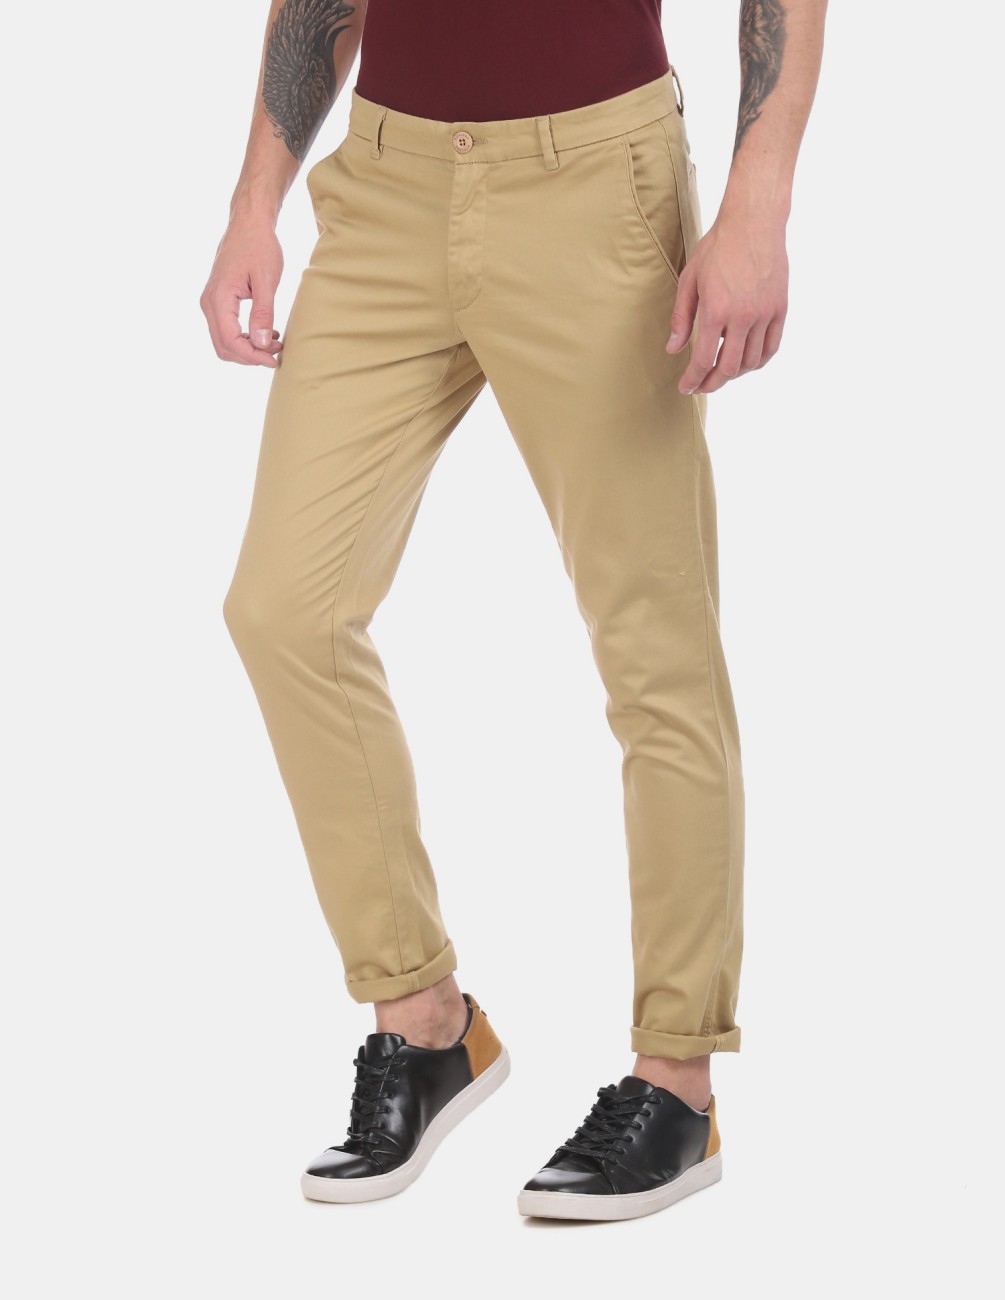 Ruggers Casual Trousers  Buy Ruggers Urban Slim Fit Cotton Trousers Online   Nykaa Fashion